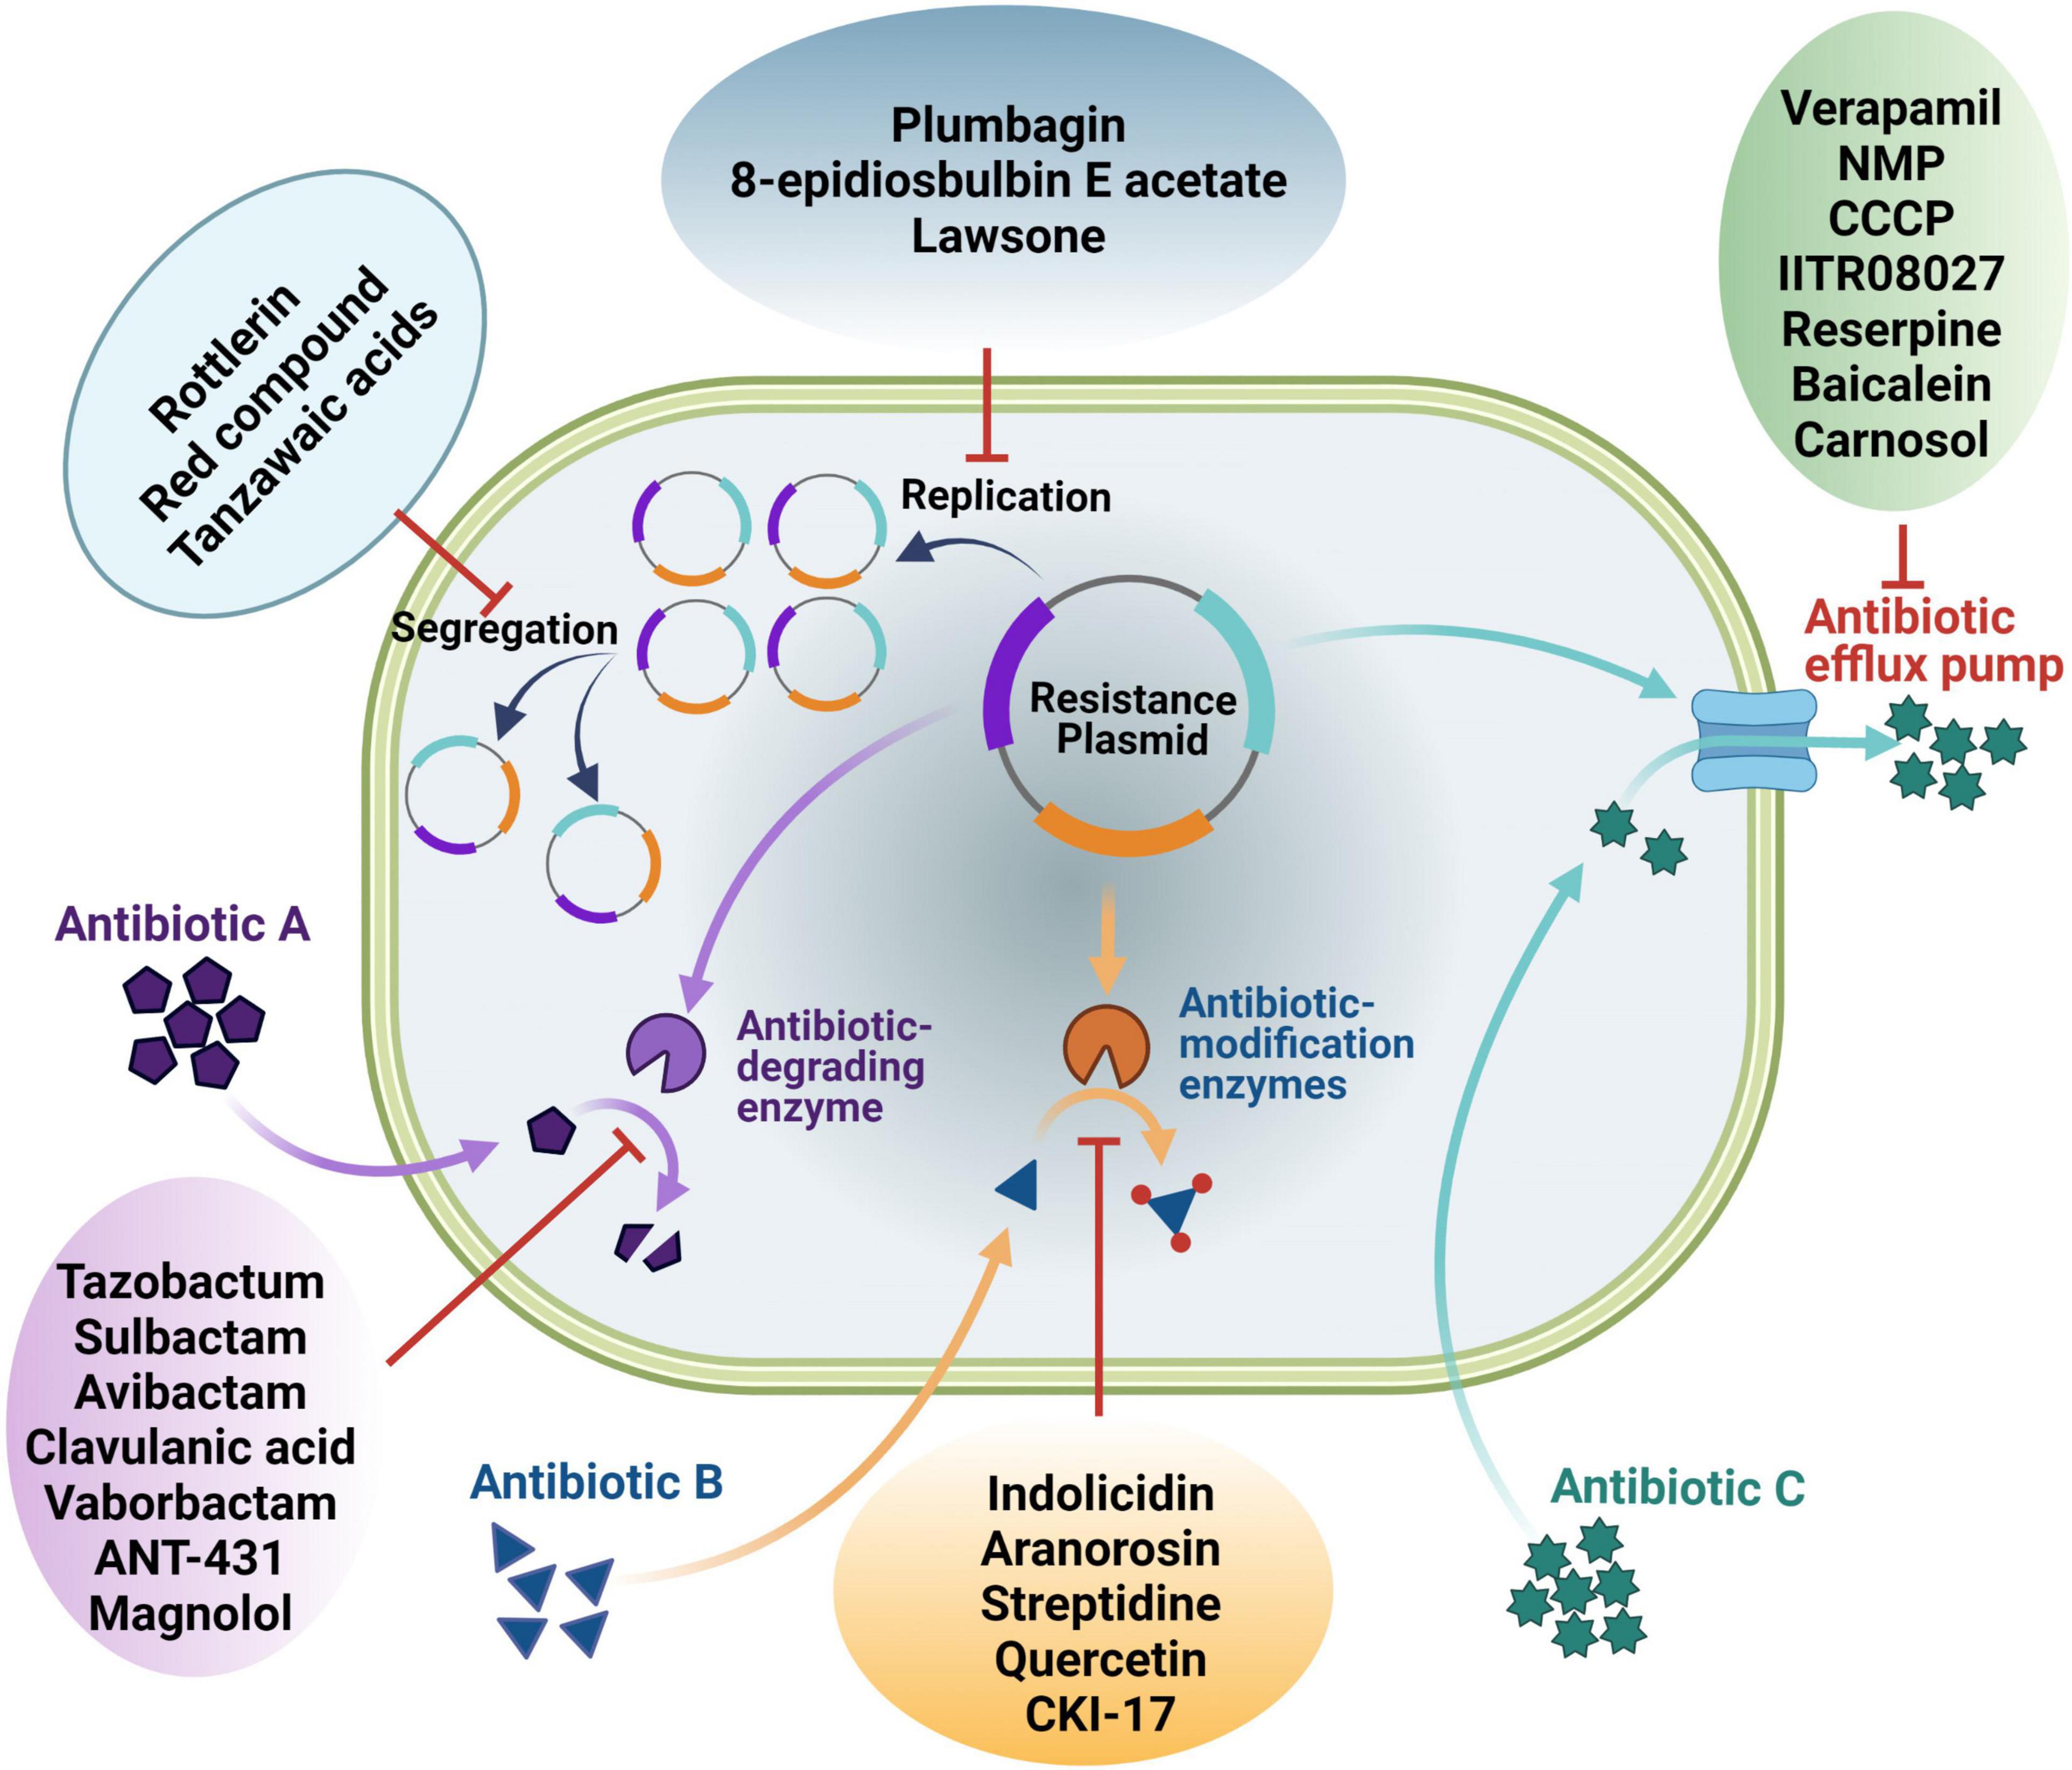 Antibacterial activity and antibiotic-modifying action of